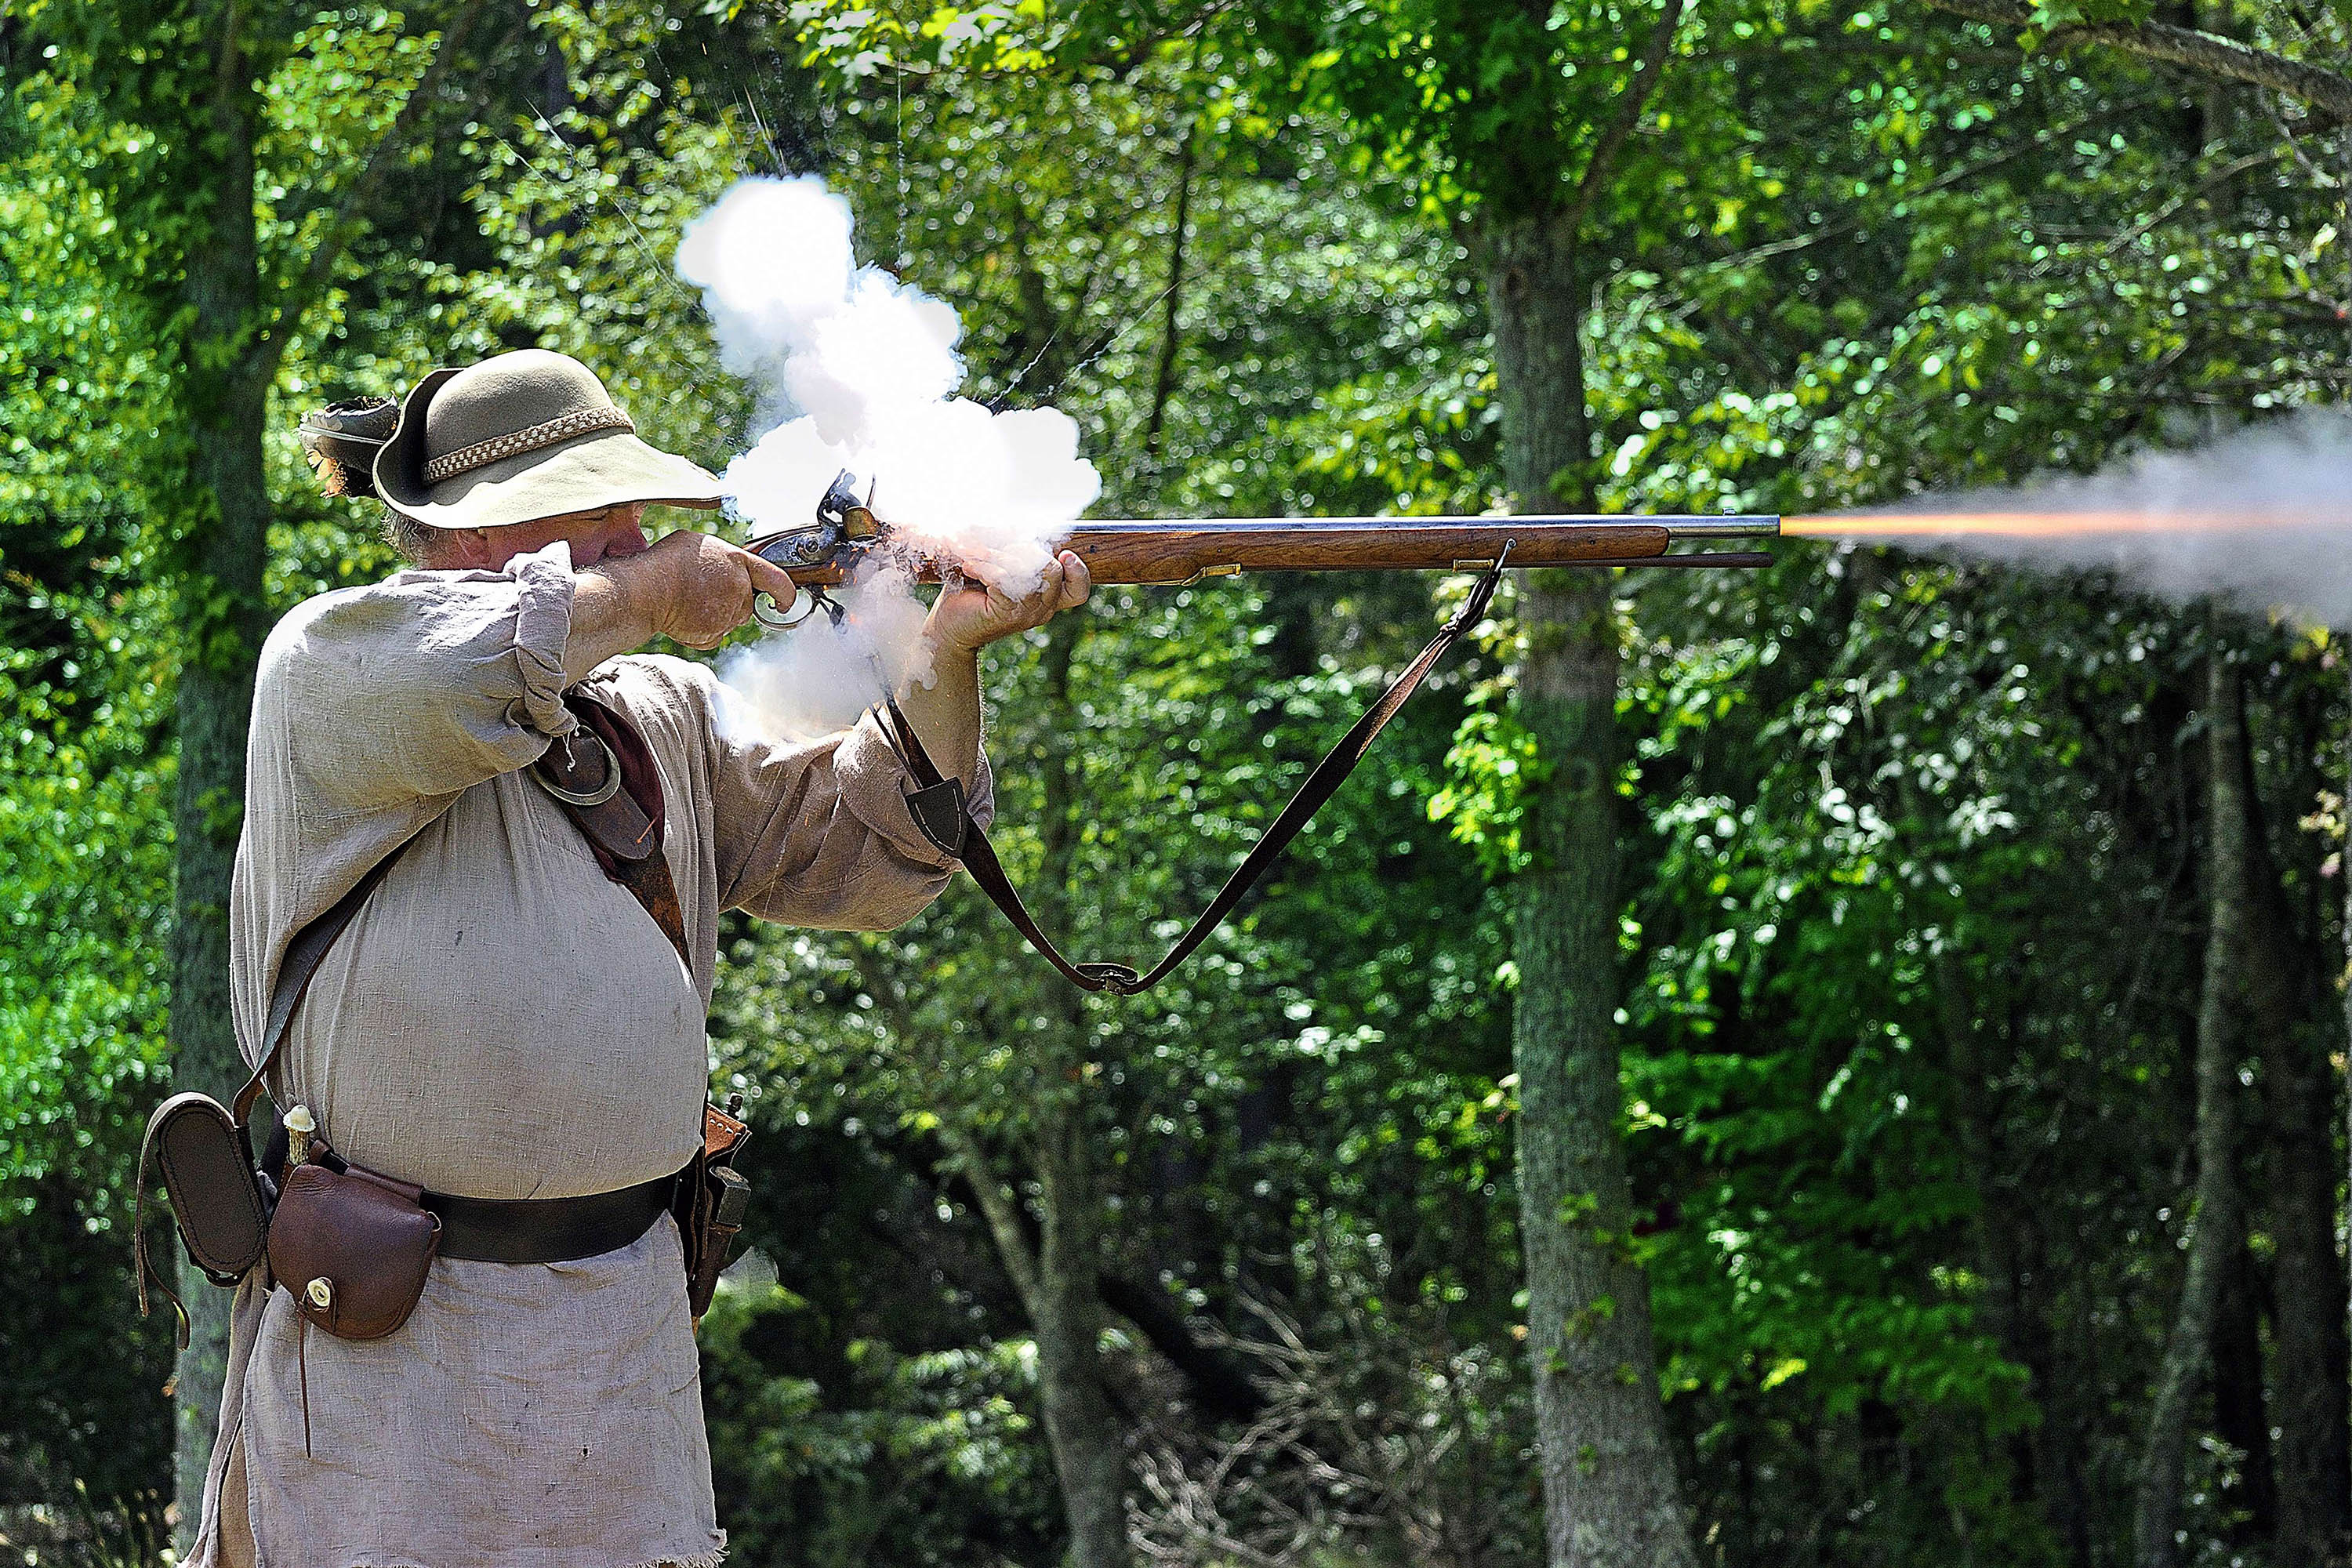 Smoke puffs up from the vent and a flame shoots out of the muzzle as a militiaman fires his musket.